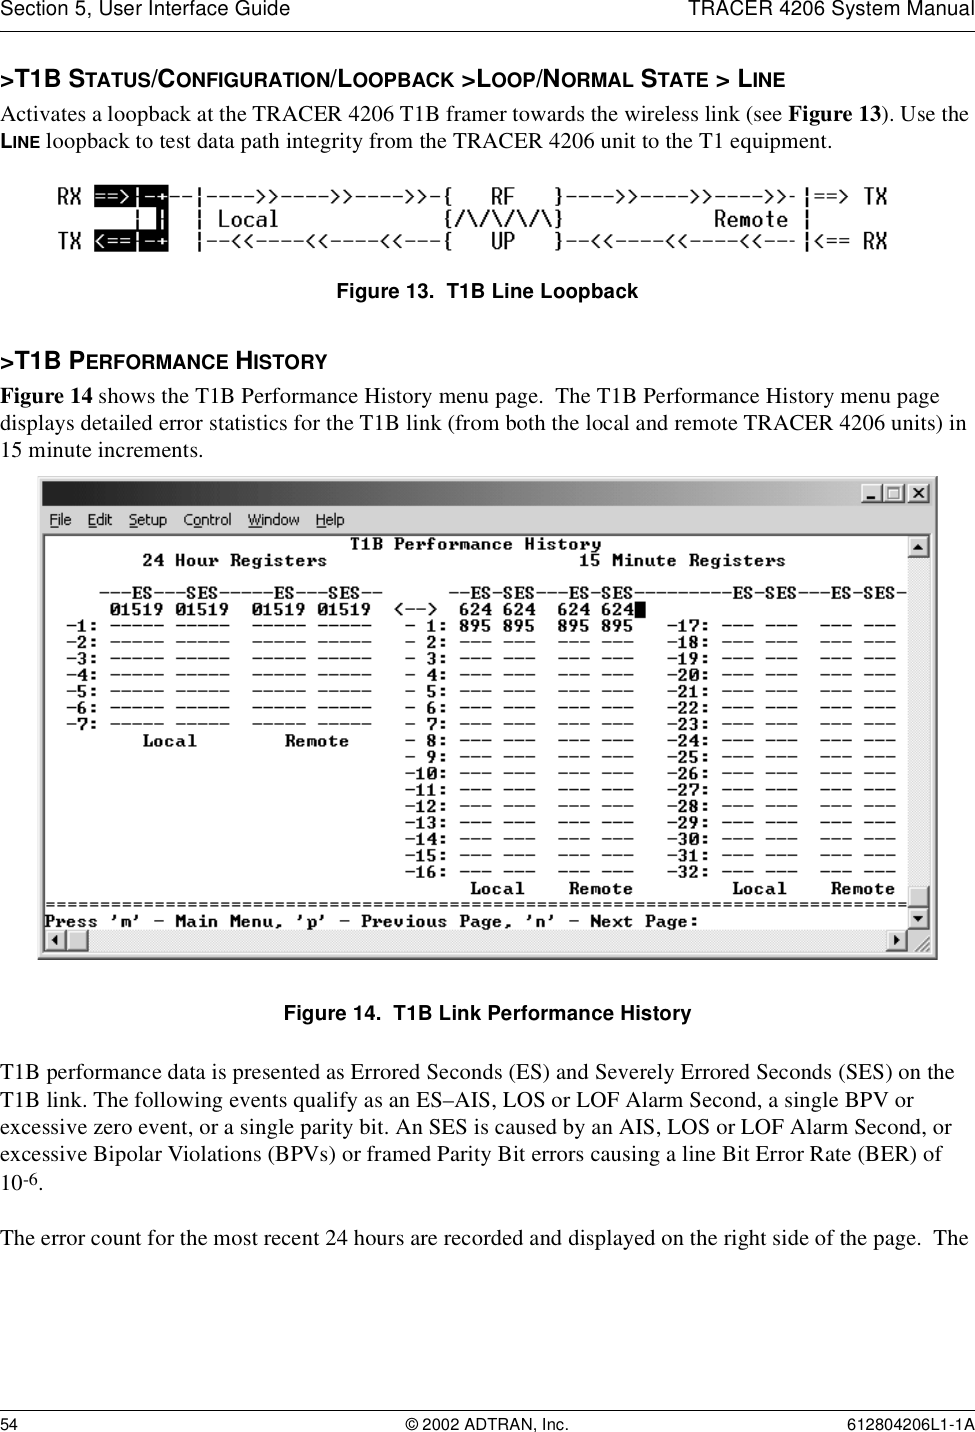 Section 5, User Interface Guide TRACER 4206 System Manual54 © 2002 ADTRAN, Inc. 612804206L1-1A&gt;T1B STATUS/CONFIGURATION/LOOPBACK &gt;LOOP/NORMAL STATE &gt; LINEActivates a loopback at the TRACER 4206 T1B framer towards the wireless link (see Figure 13). Use the LINE loopback to test data path integrity from the TRACER 4206 unit to the T1 equipment.Figure 13.  T1B Line Loopback&gt;T1B PERFORMANCE HISTORYFigure 14 shows the T1B Performance History menu page.  The T1B Performance History menu page displays detailed error statistics for the T1B link (from both the local and remote TRACER 4206 units) in 15 minute increments. Figure 14.  T1B Link Performance HistoryT1B performance data is presented as Errored Seconds (ES) and Severely Errored Seconds (SES) on the T1B link. The following events qualify as an ES–AIS, LOS or LOF Alarm Second, a single BPV or excessive zero event, or a single parity bit. An SES is caused by an AIS, LOS or LOF Alarm Second, or excessive Bipolar Violations (BPVs) or framed Parity Bit errors causing a line Bit Error Rate (BER) of 10-6.The error count for the most recent 24 hours are recorded and displayed on the right side of the page.  The 